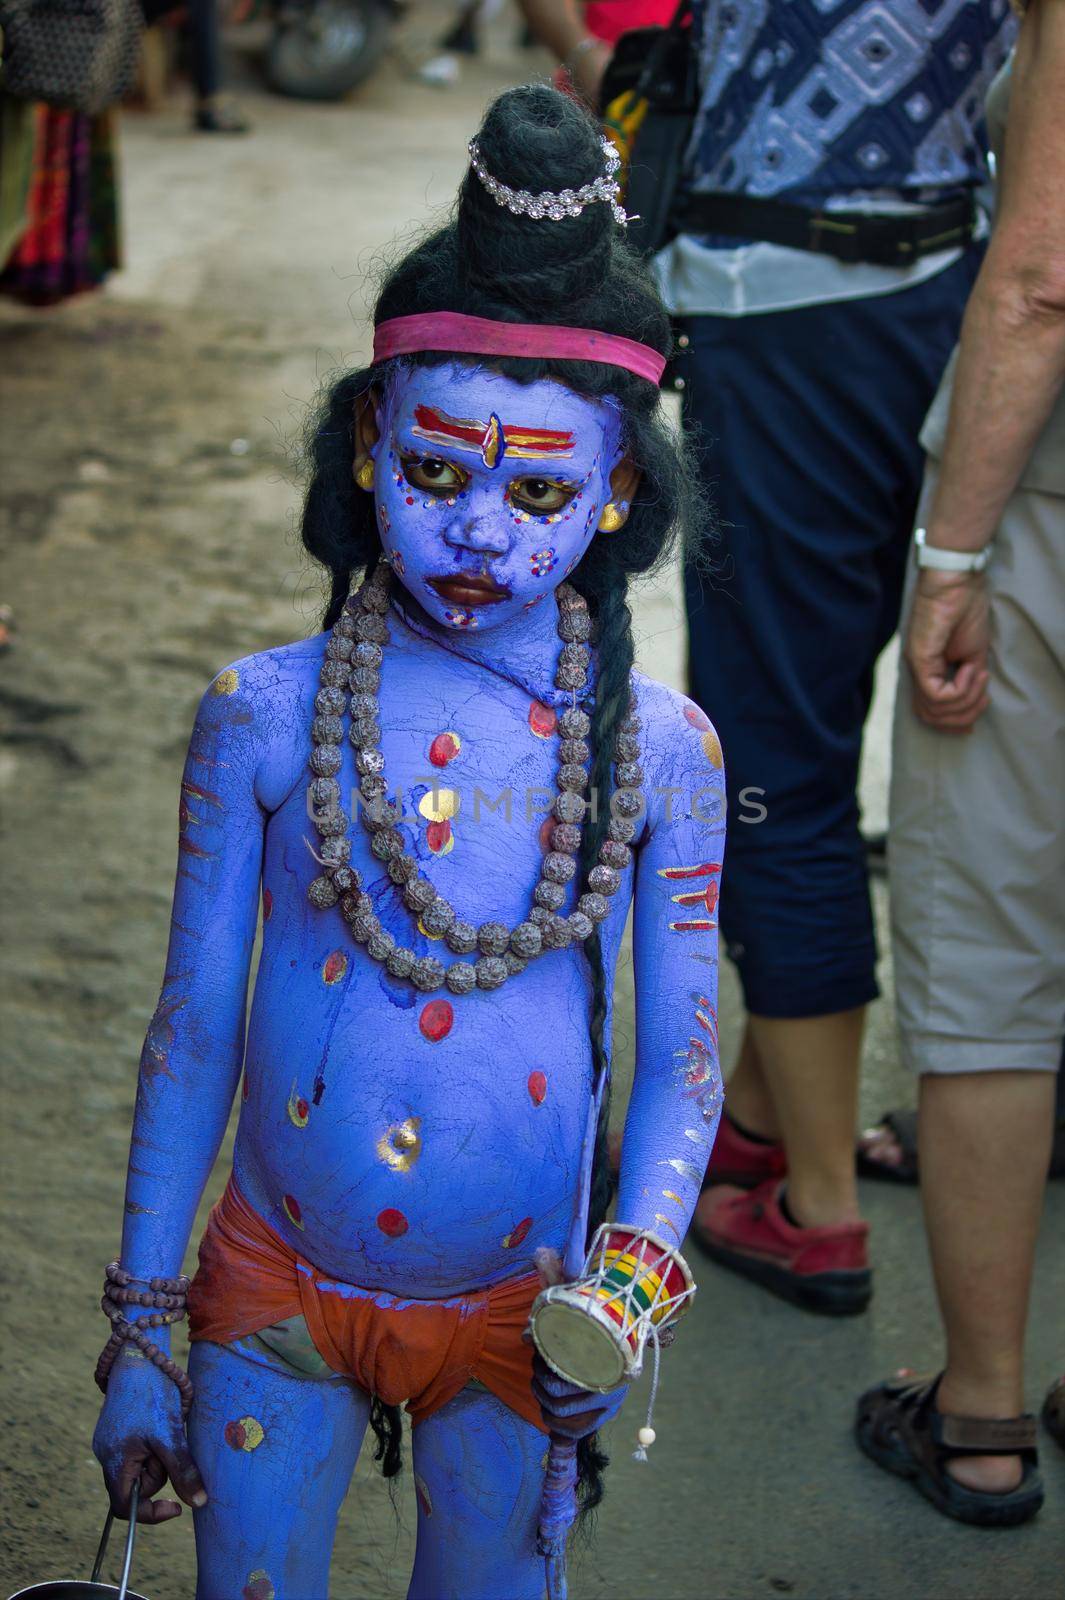 Pushkar, India - November 10, 2016: An unidentified boy dressed and disguised as hindu Lord Shiva with blue paint attends the Pushkar cattle fair in the state of Rajasthan by arpanbhatia